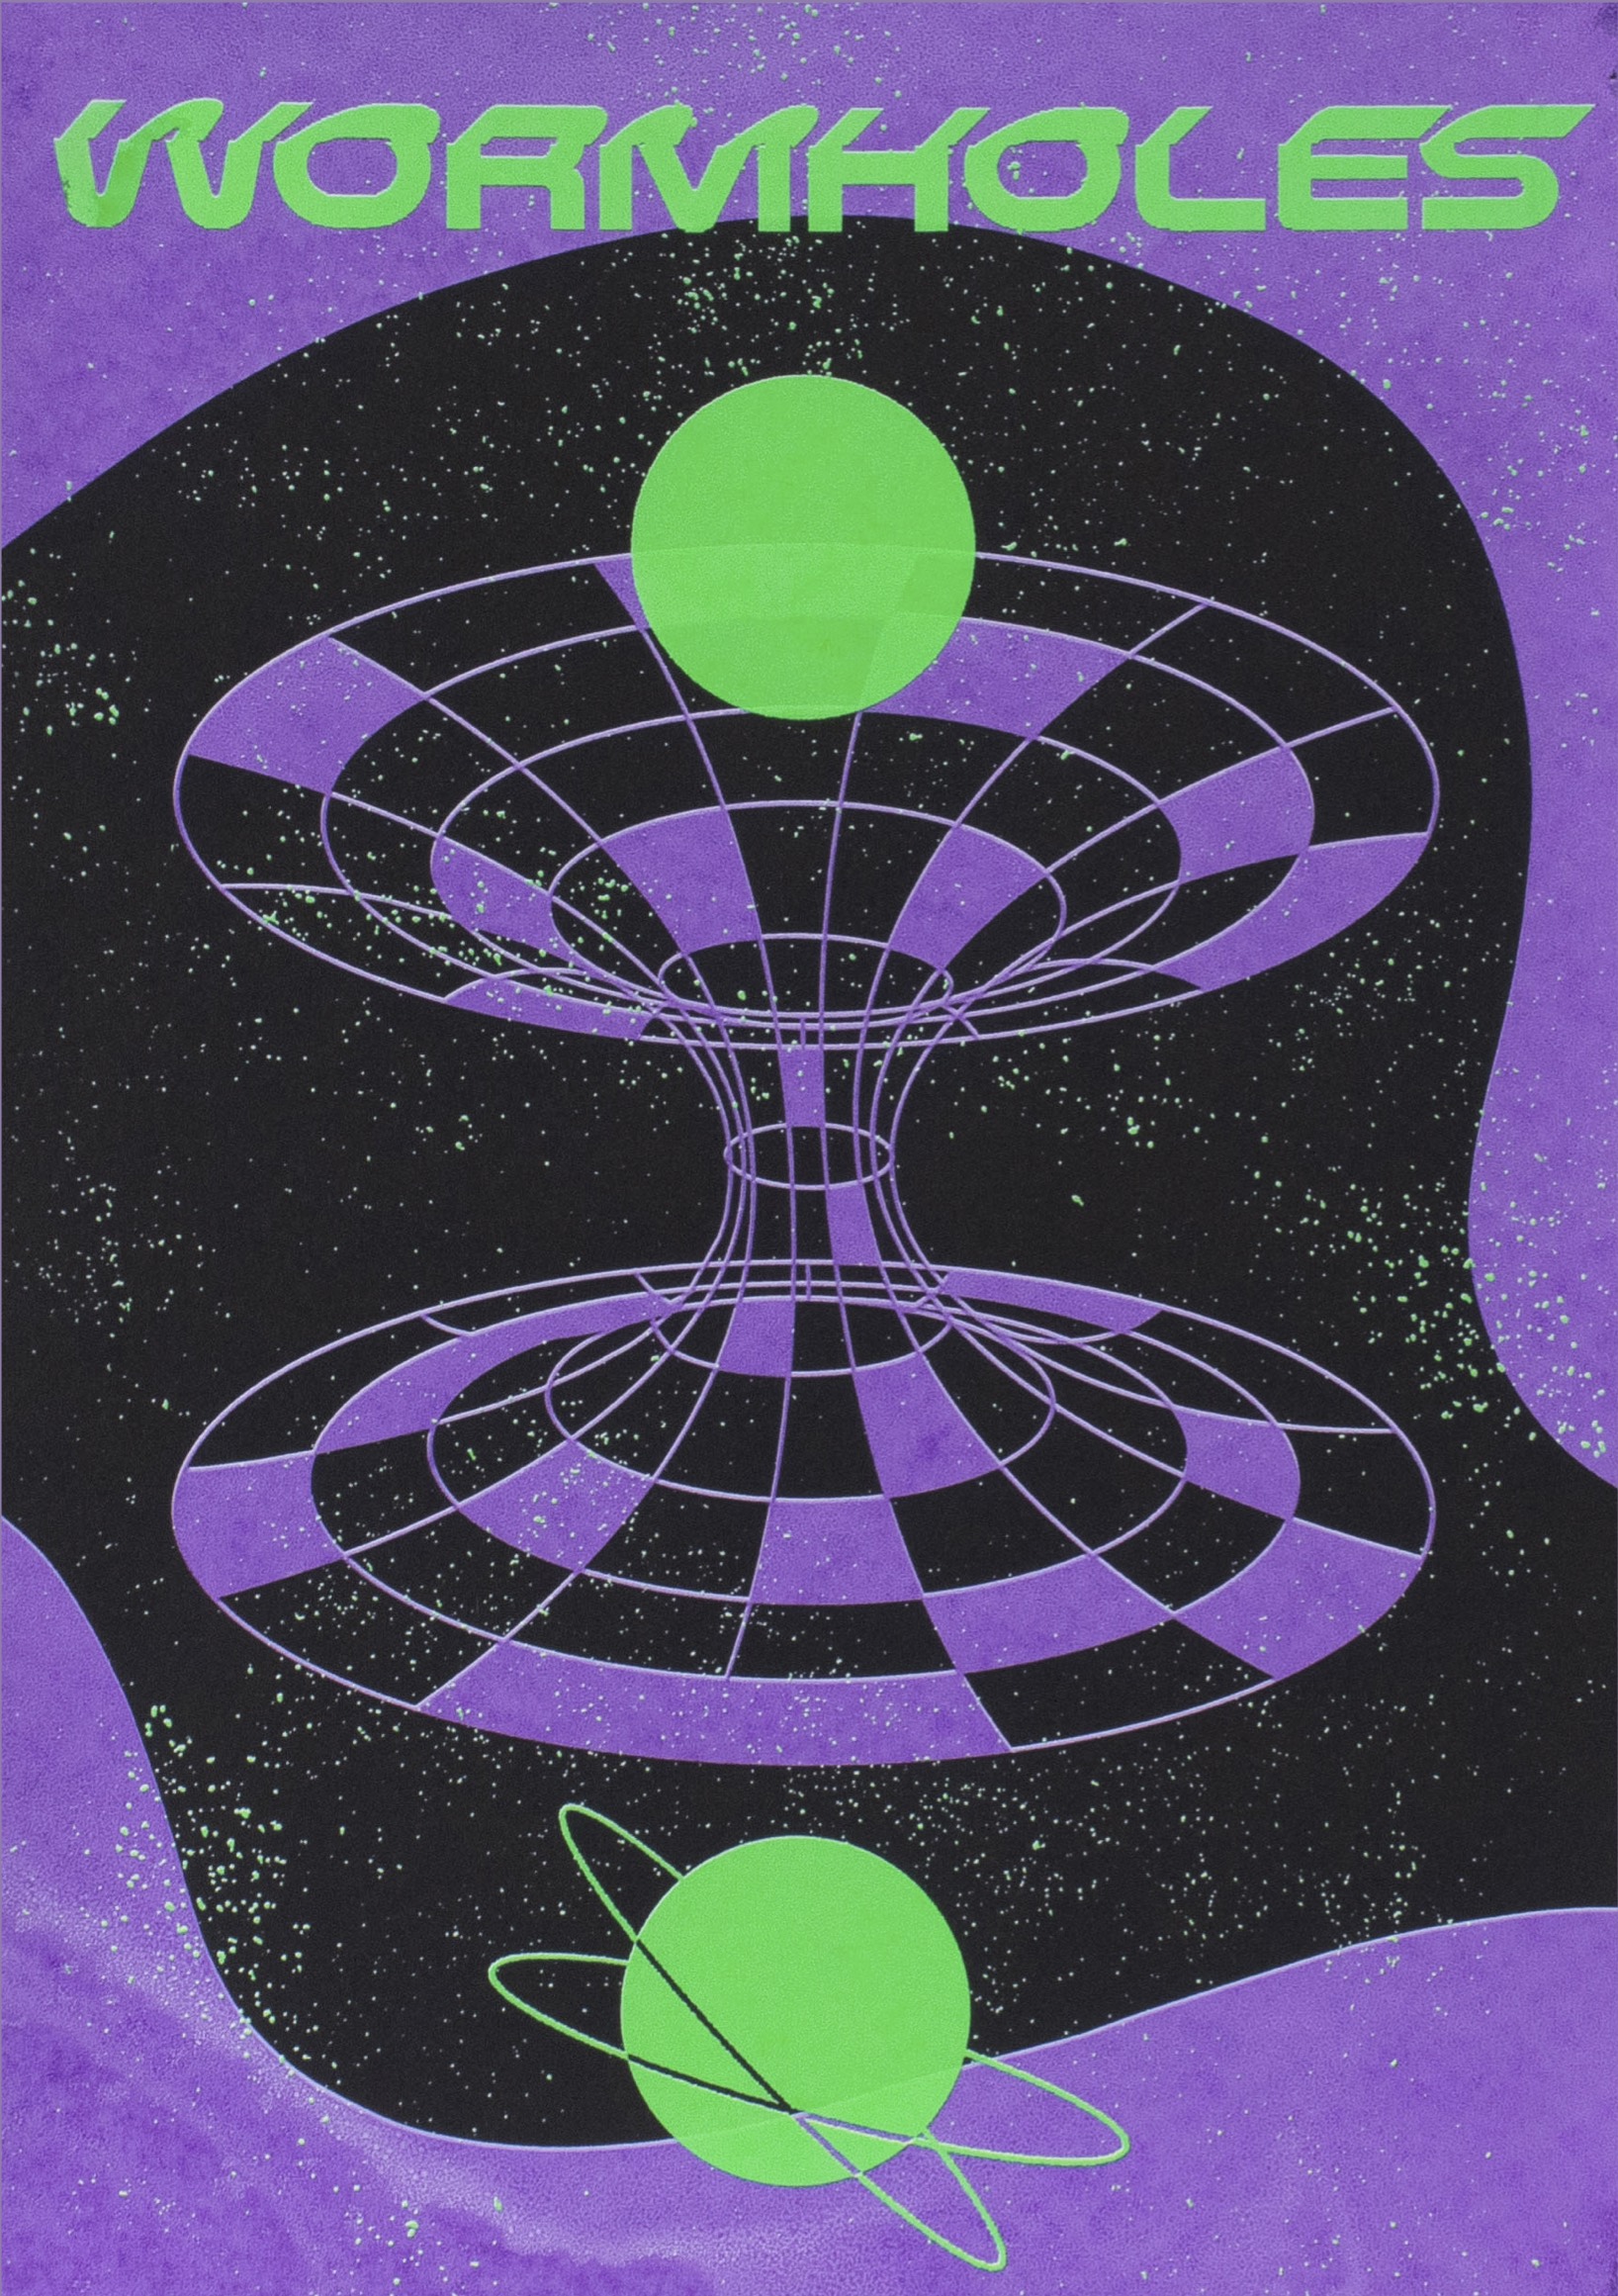 BA Illustration A3 screen print by Marianne Sleiman showing a layered green and purple screen print on black paper, depicting the space theory: wormholes.